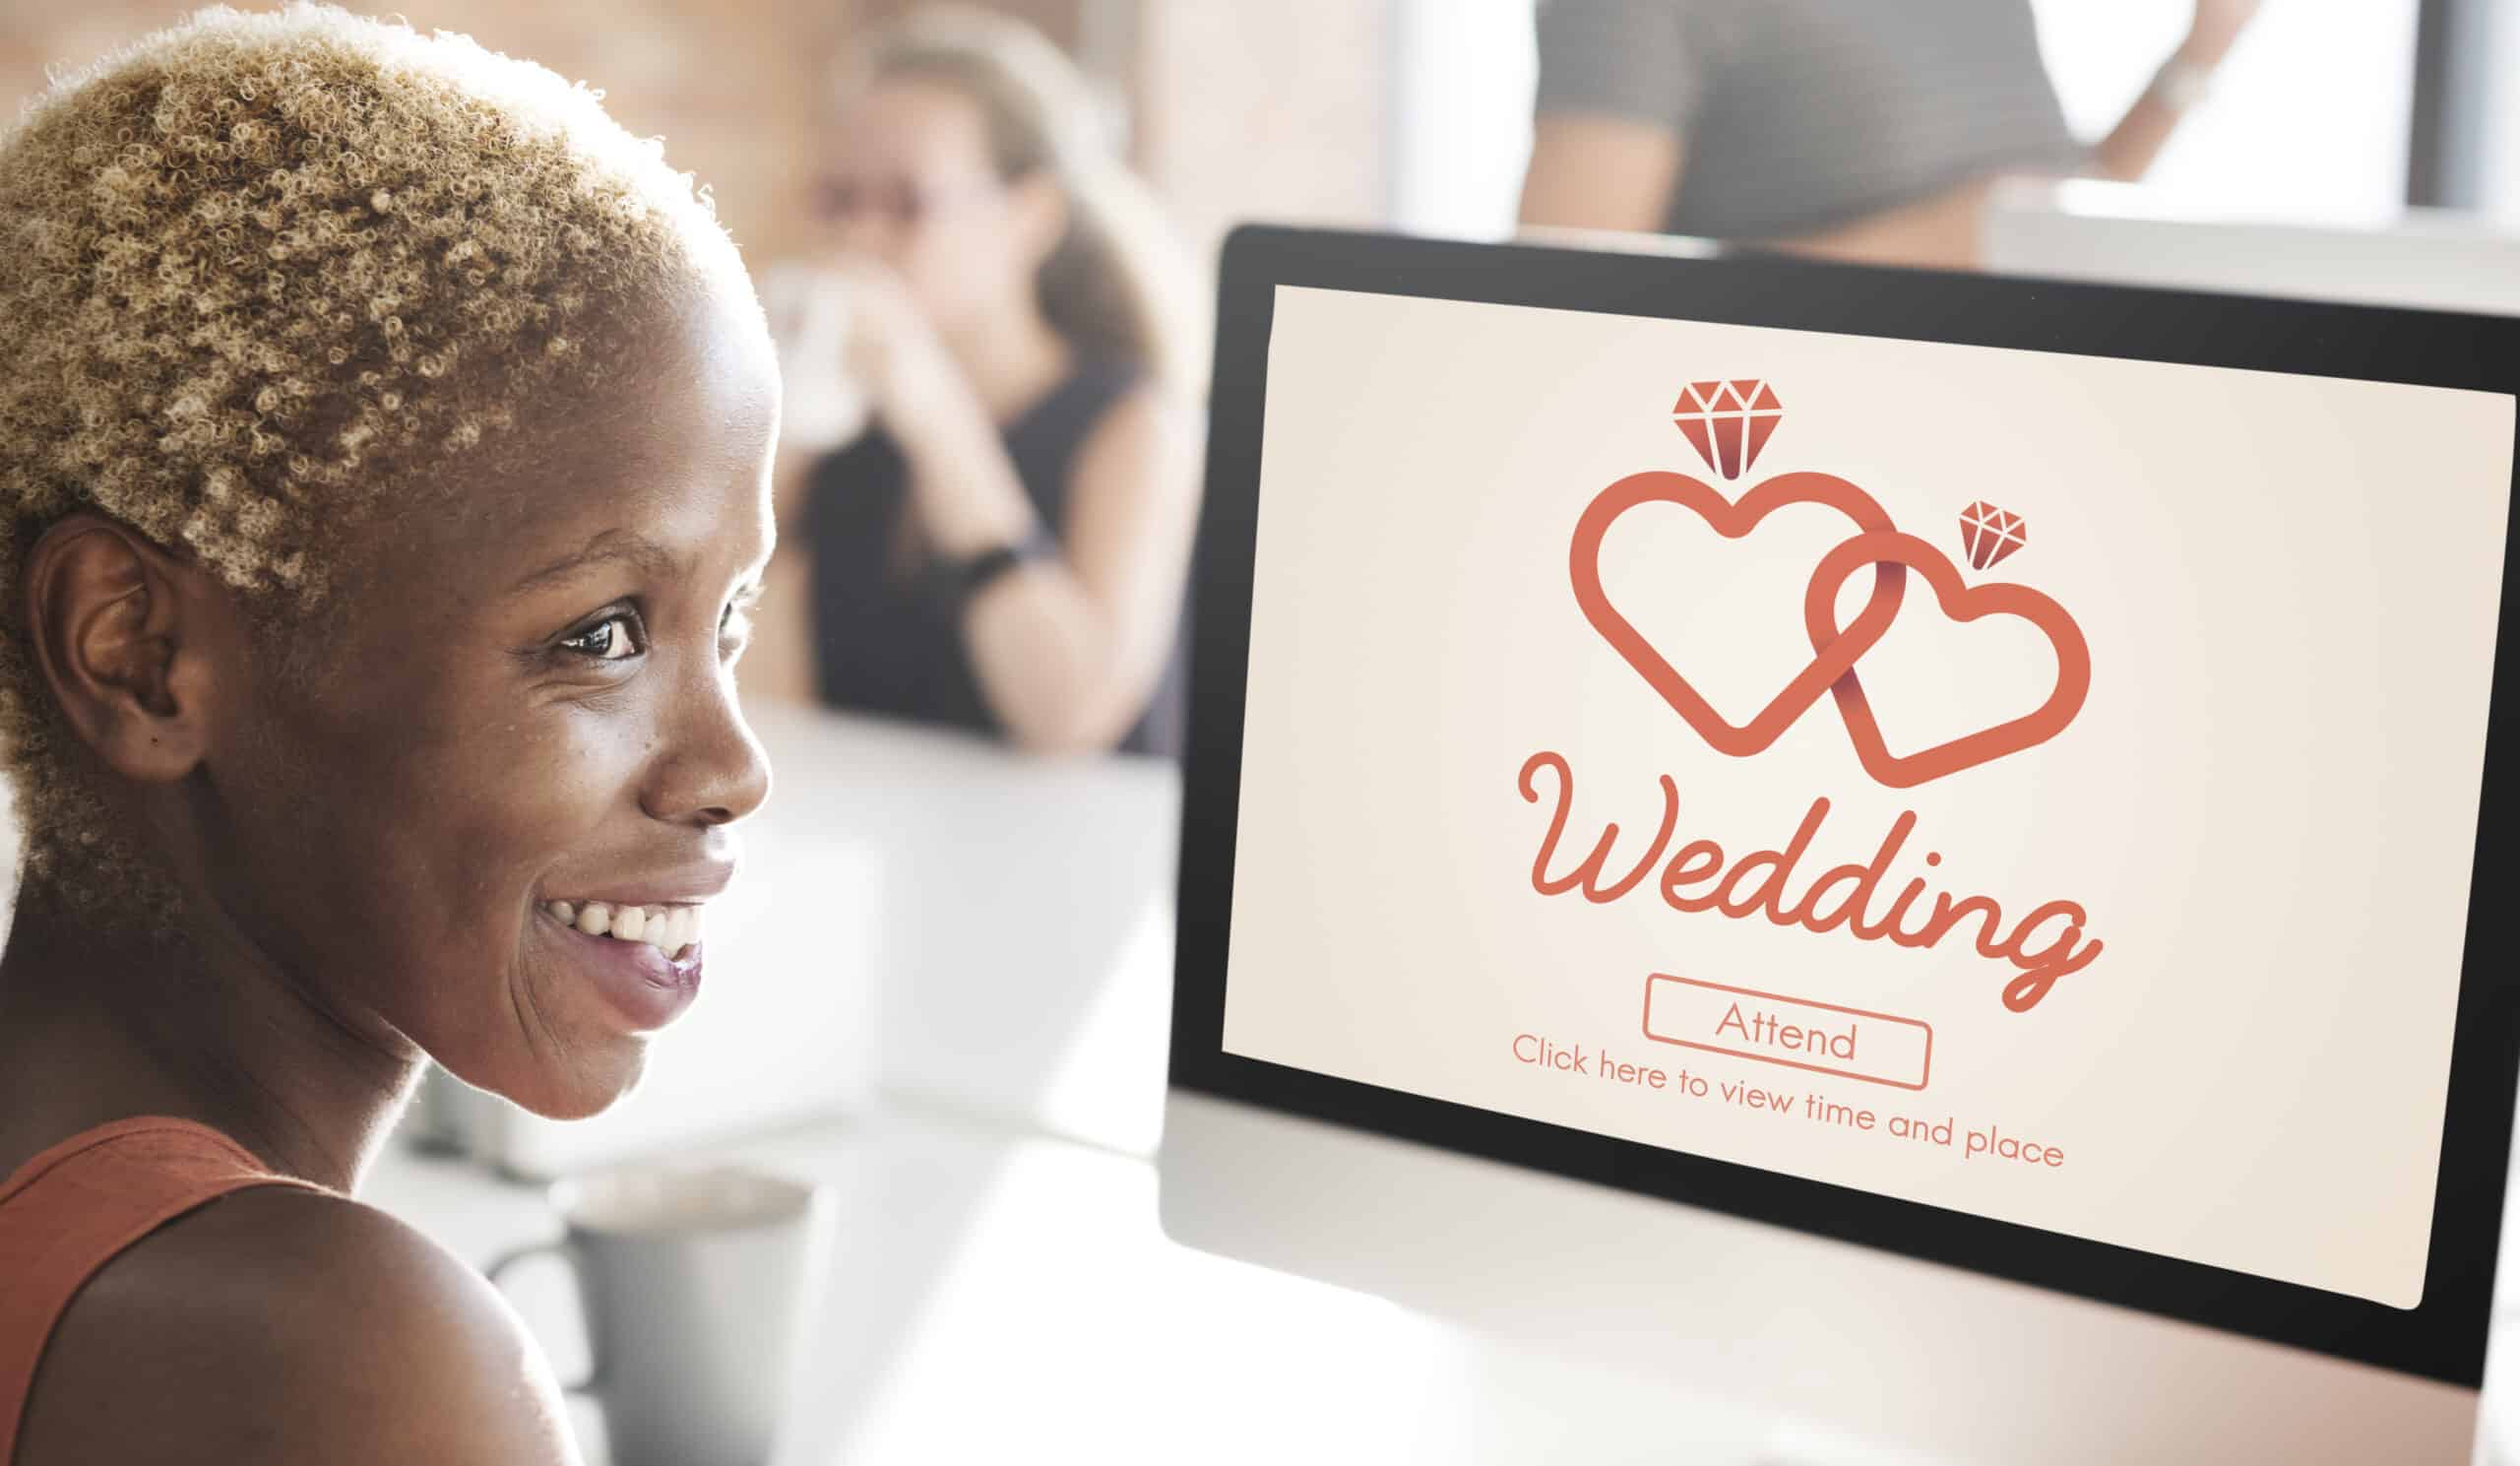 Woman sitting at computer viewing online wedding invitation